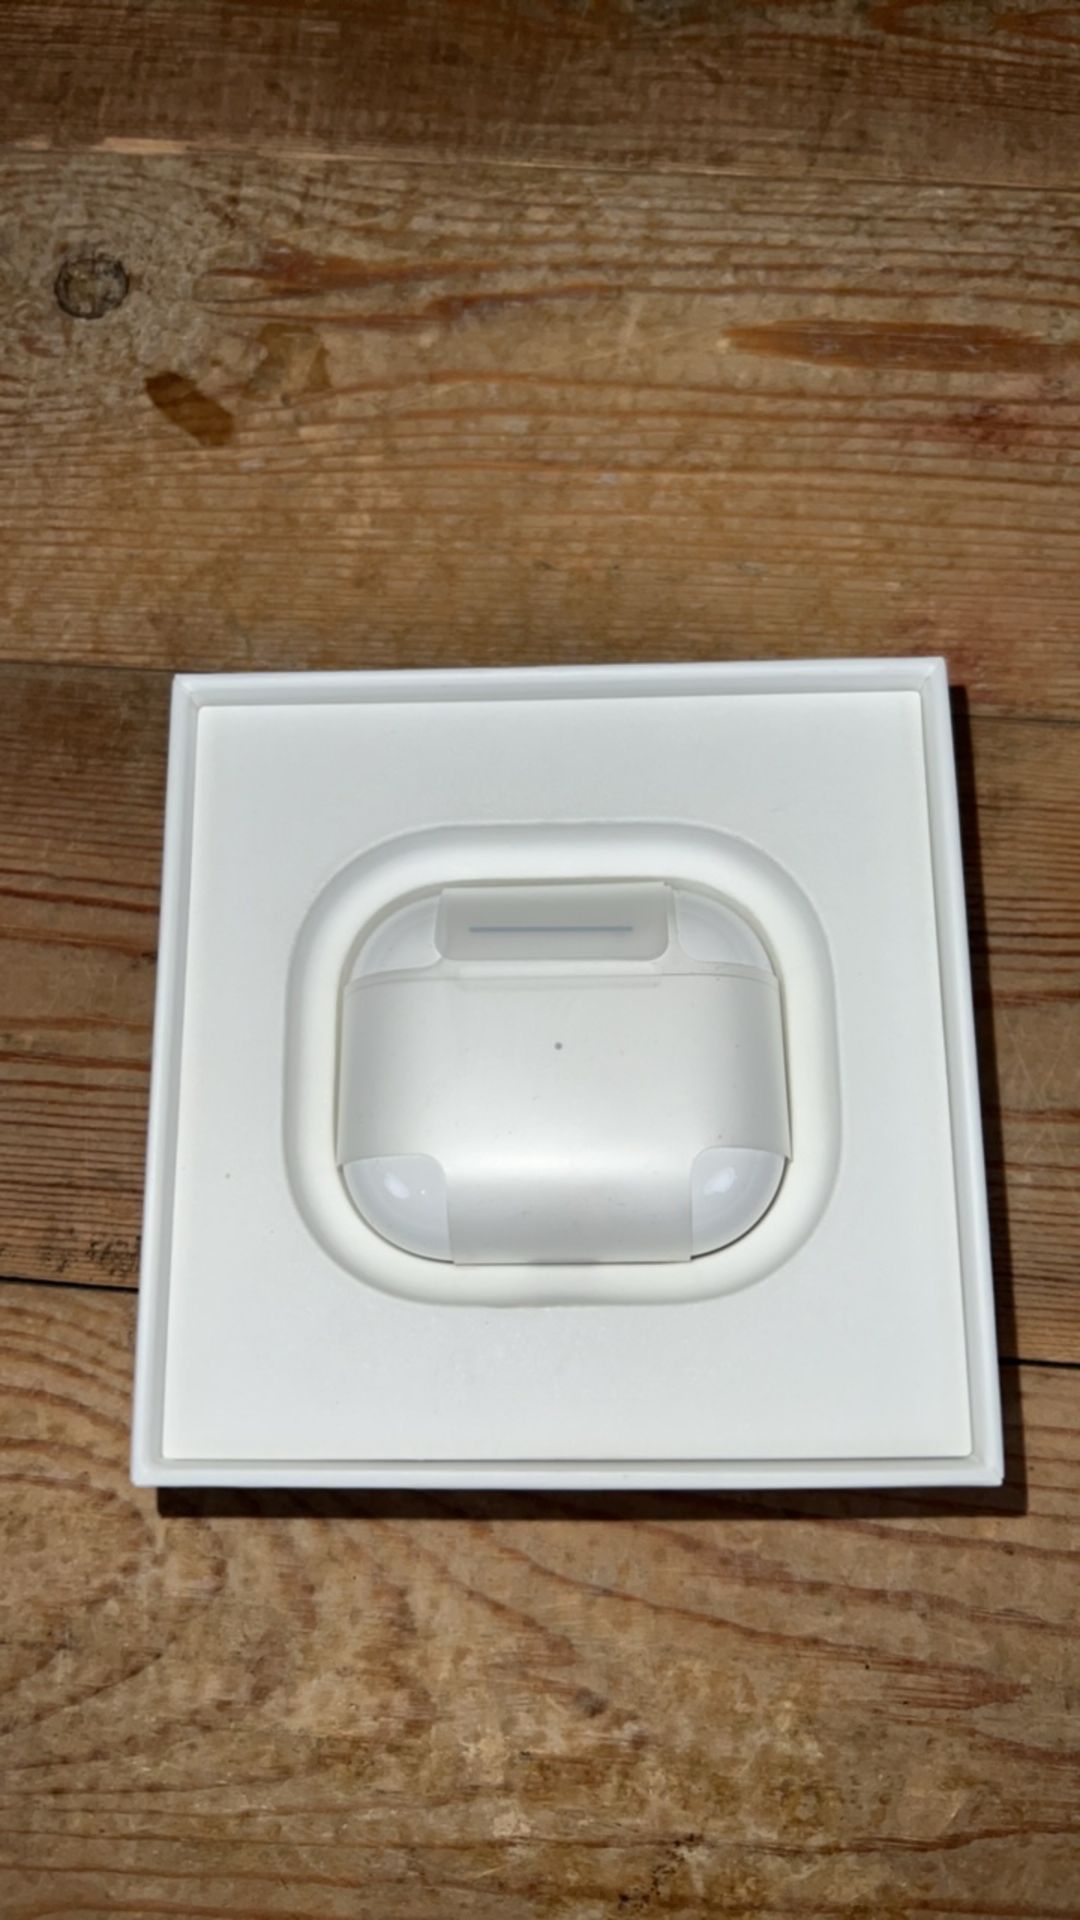 Apple Air Pods (3rd Generation) Charging Case Included - Image 2 of 5